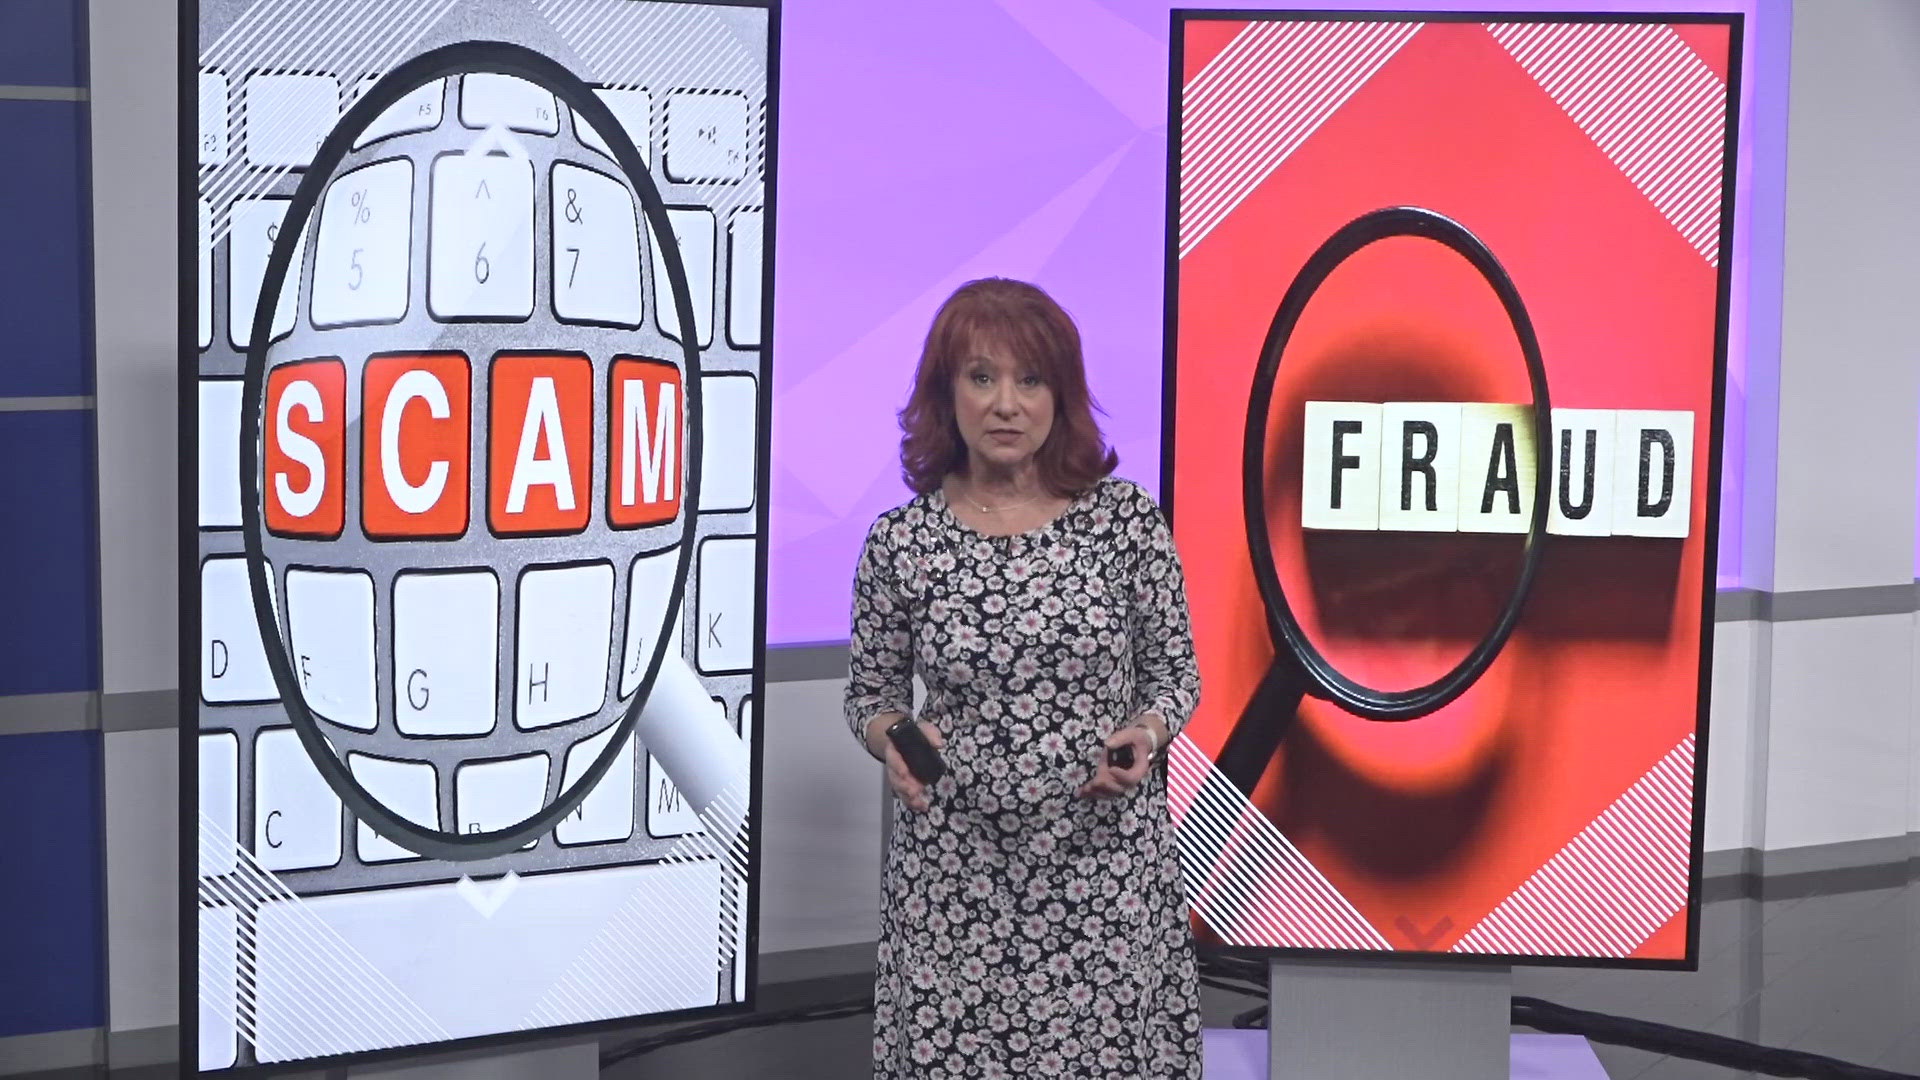 2WTK explains the difference between Scams and Fraud.